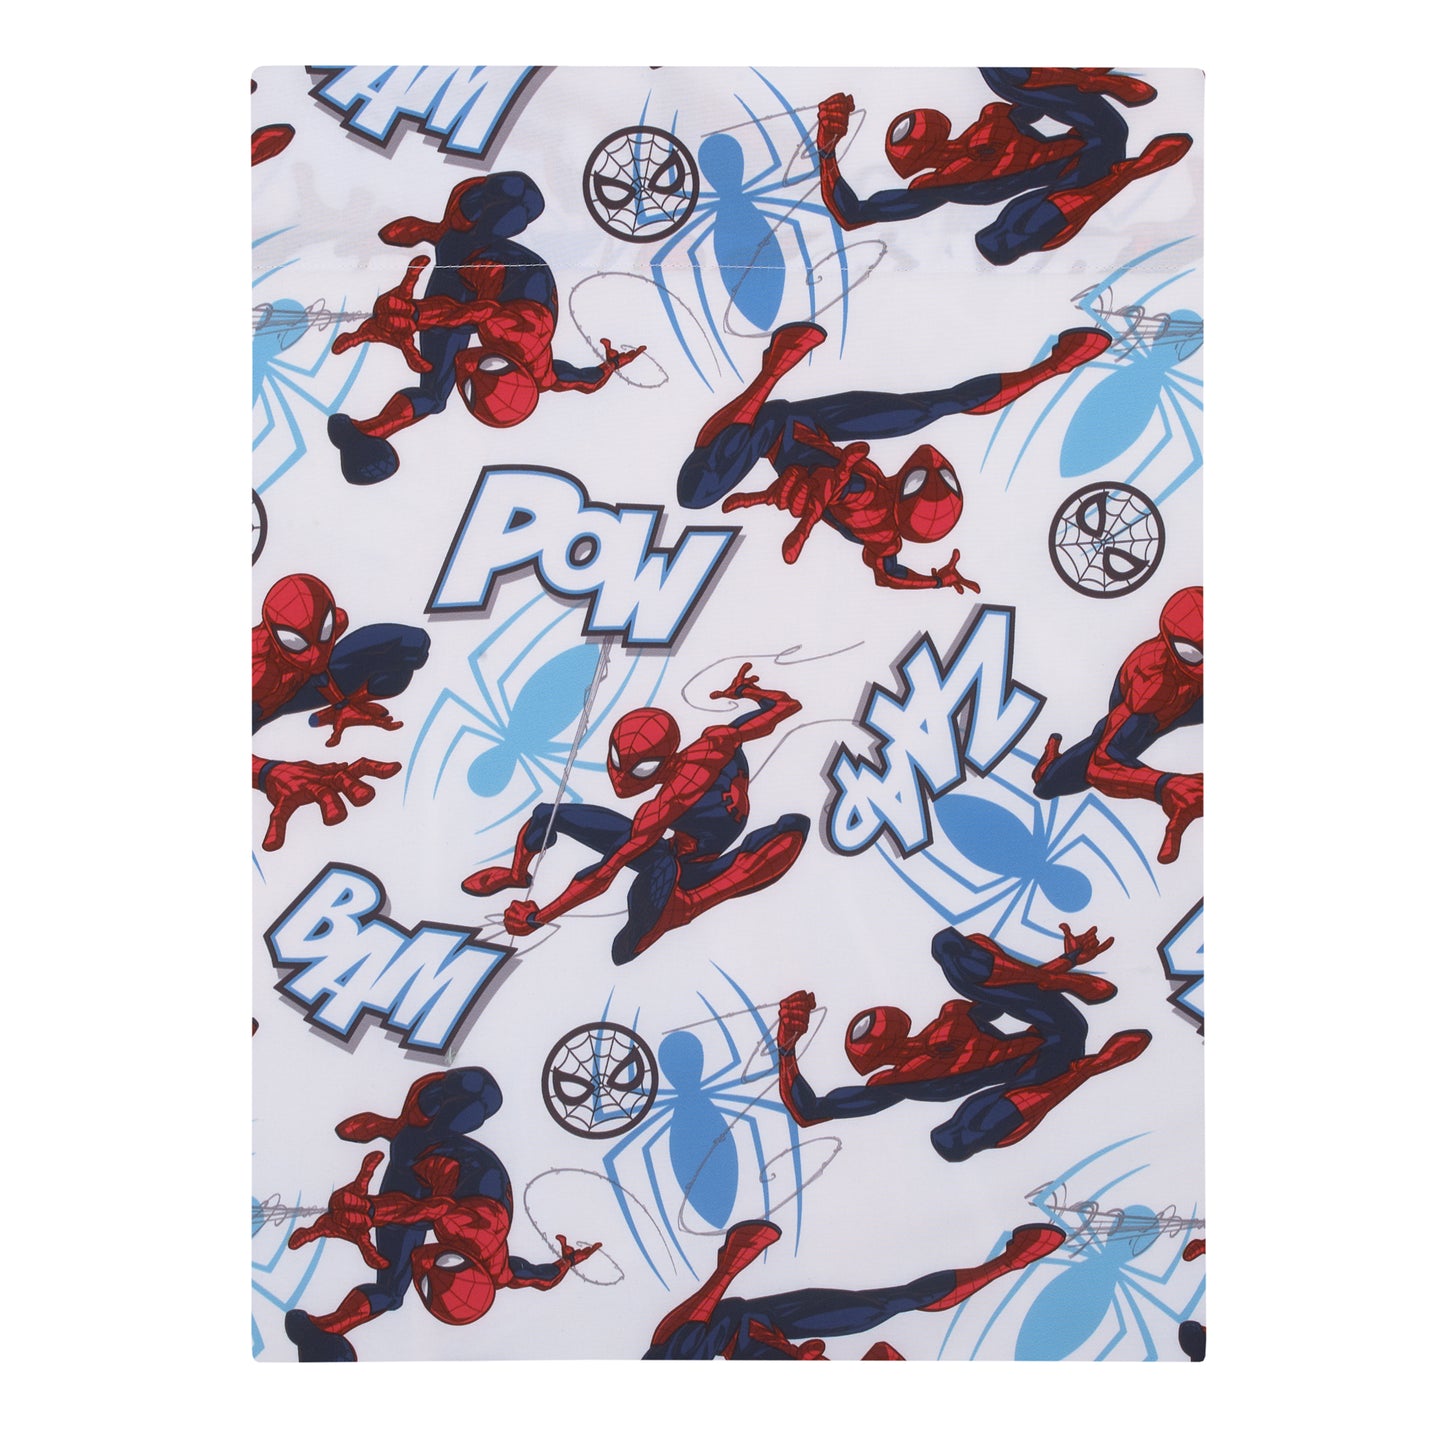 Marvel Spiderman to the Rescue Red, White, and Blue 4 Piece Toddler Bed Set - Comforter, Fitted Bottom Sheet, Flat Top Sheet, and Reversible Pillowcase